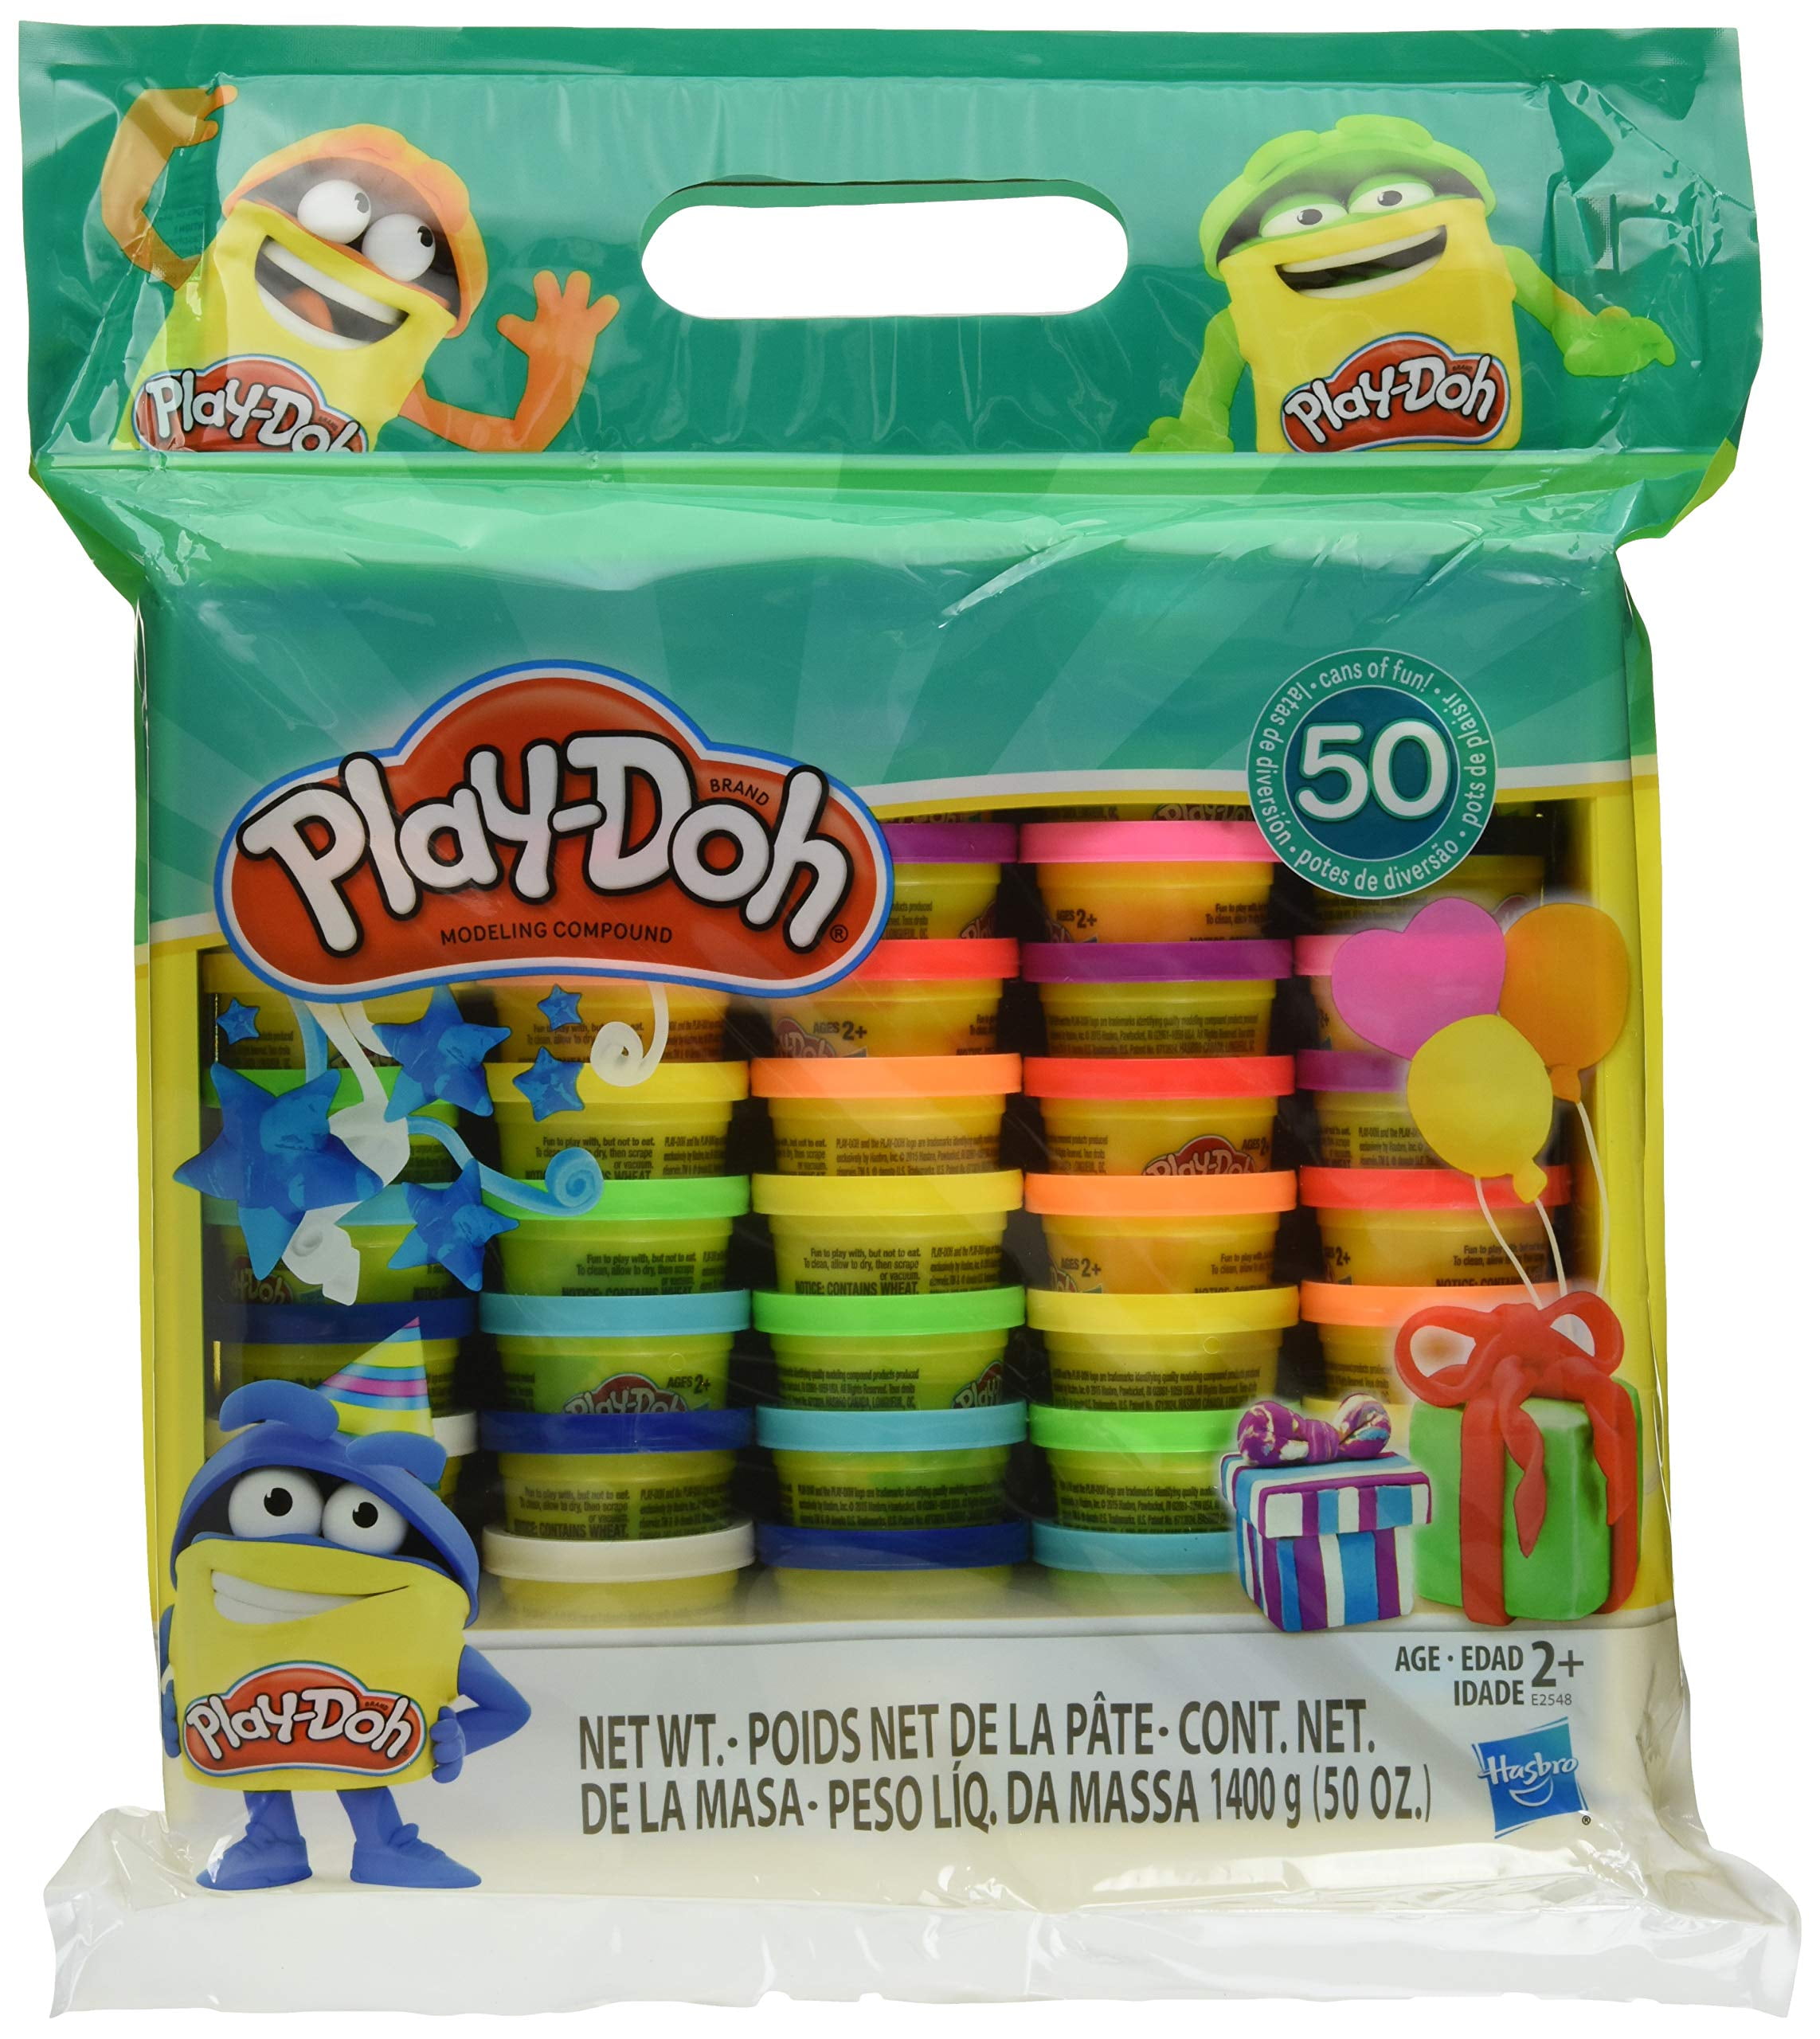 Value Pack Case of Colors Play-Doh Modeling Compound 50 Non-Toxic Assorted 